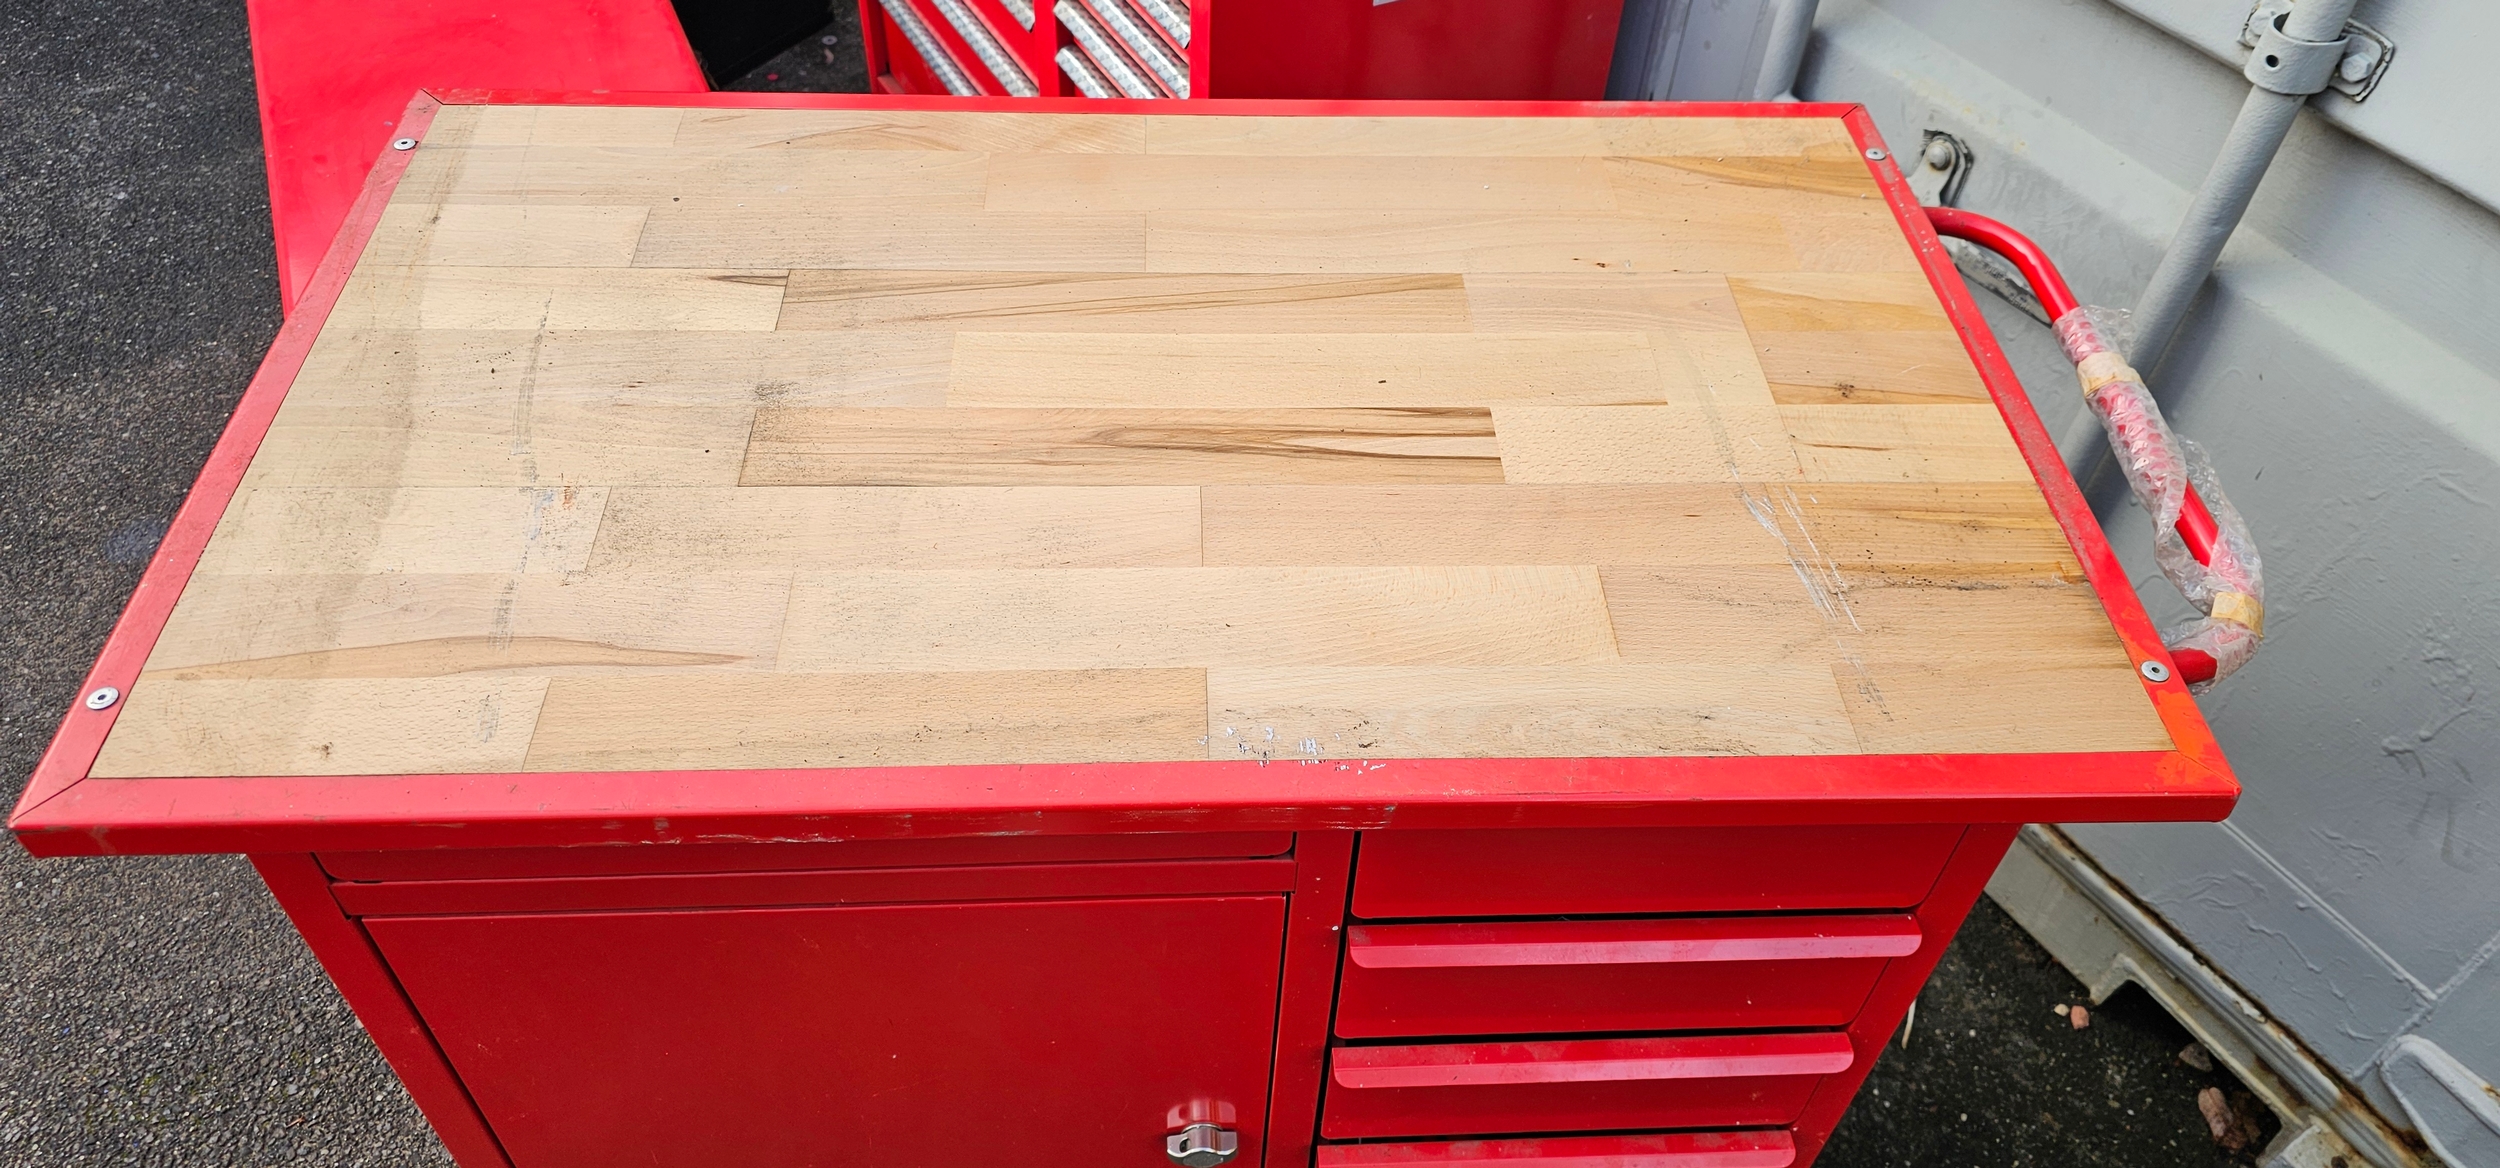 A Sealy work bench with wood work top, model AP1000M, 93 x 99 x 59cm - Image 2 of 4